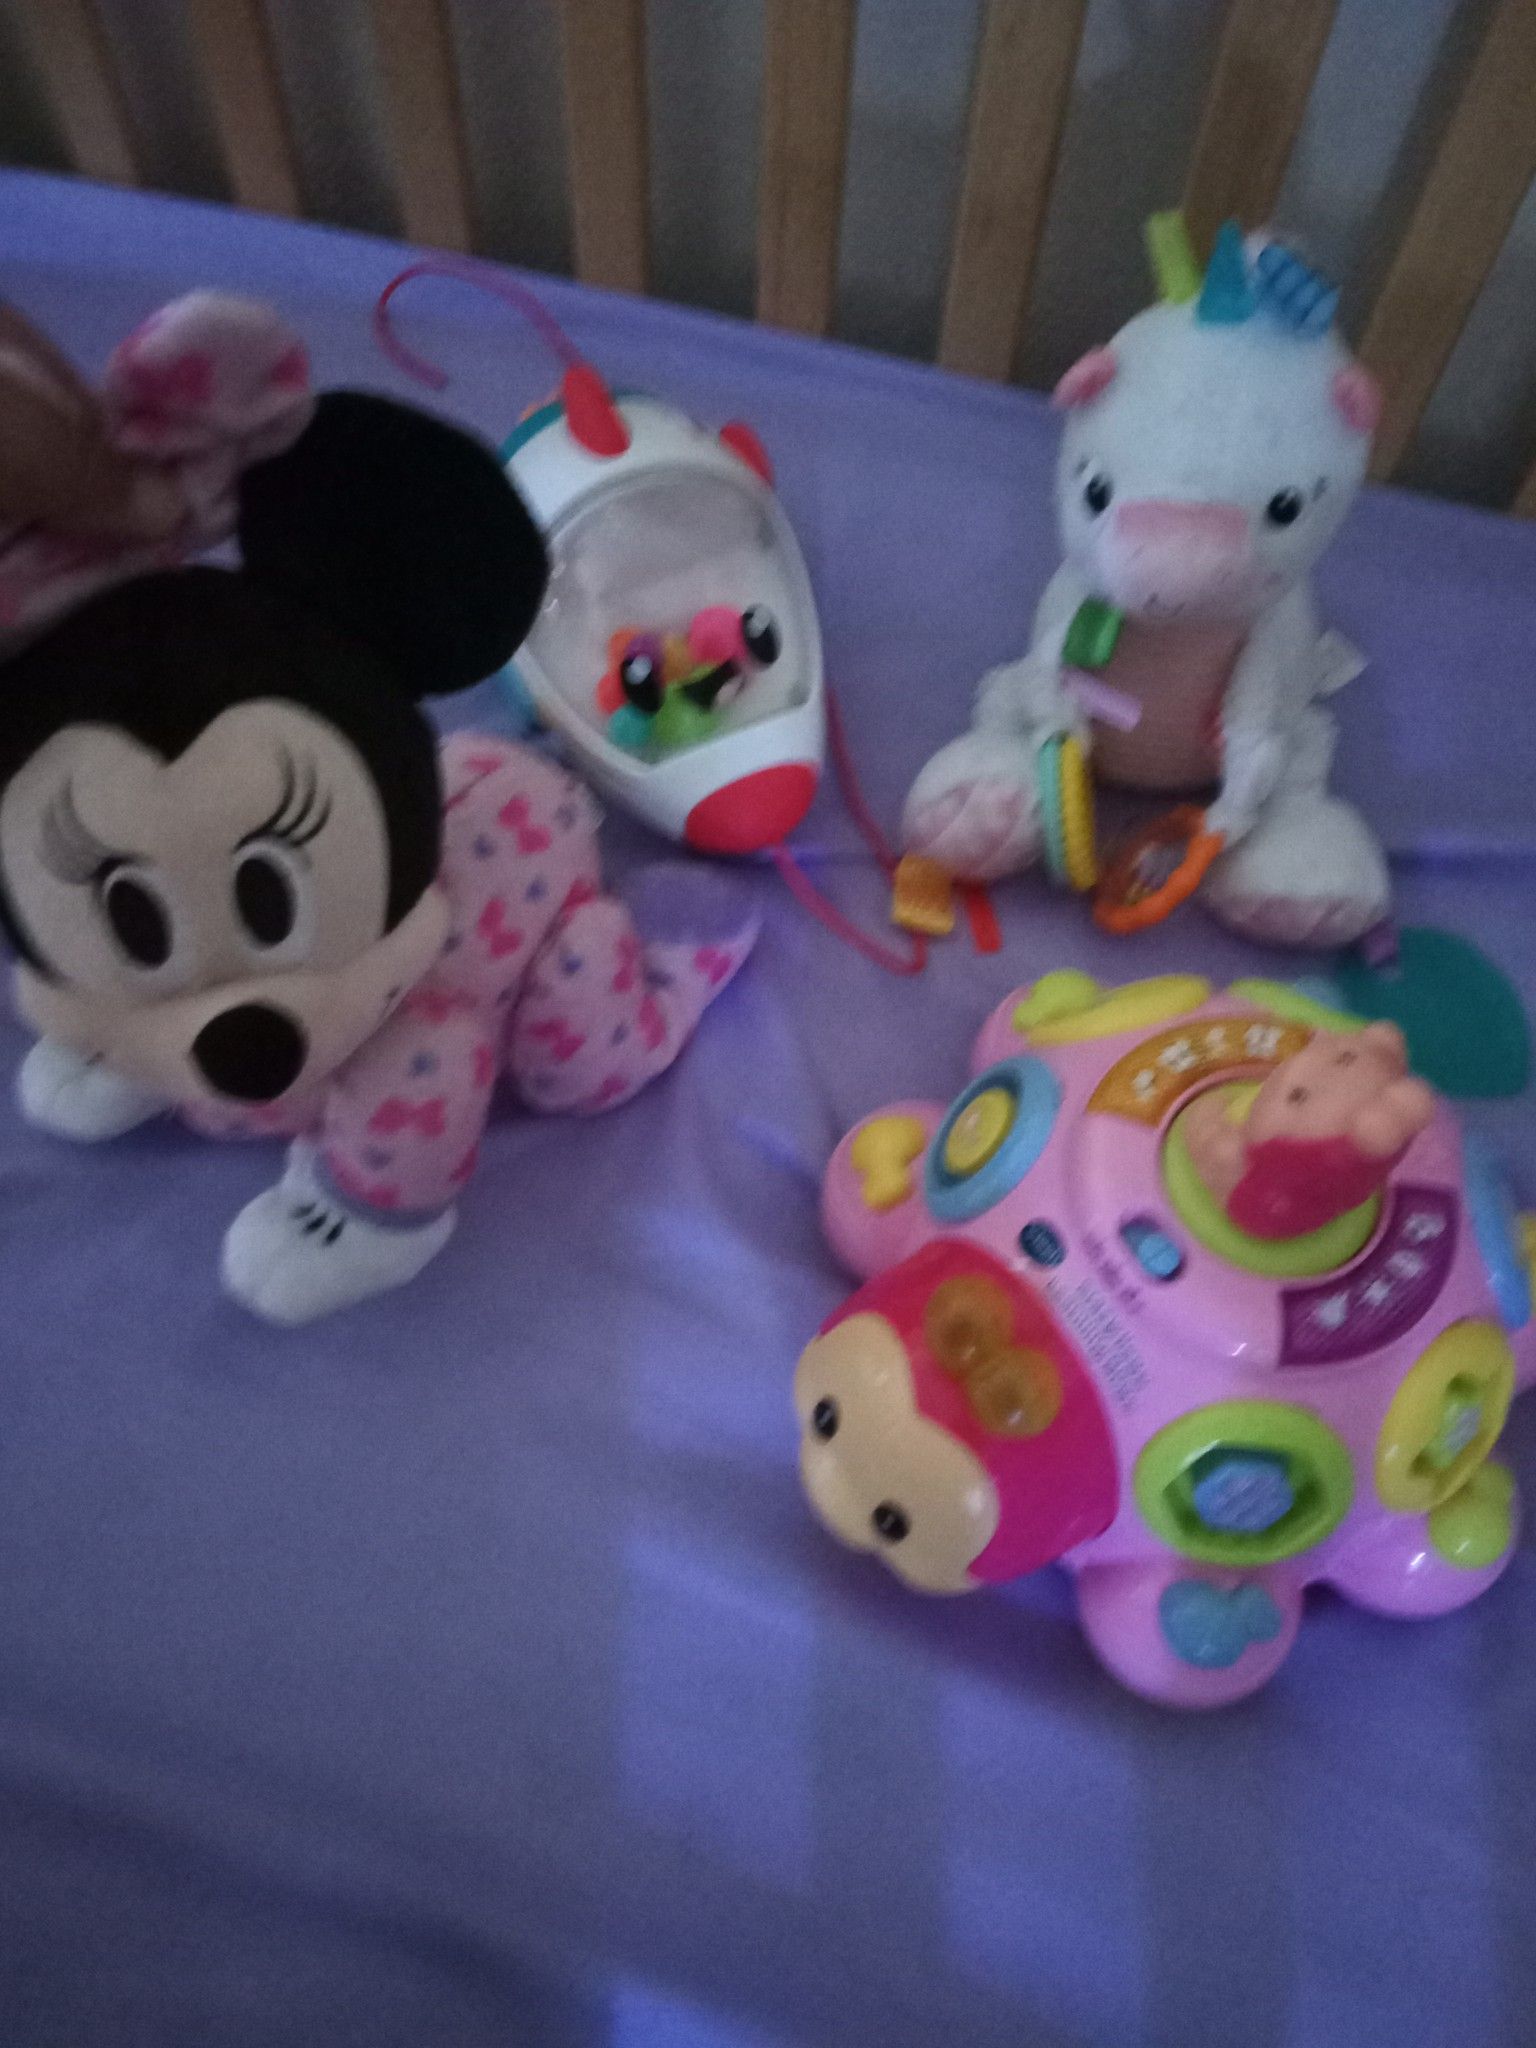 Disney's crawling Minnie mouse and other light up animated toy a unicorn rattle and a rocketship popper great for babies